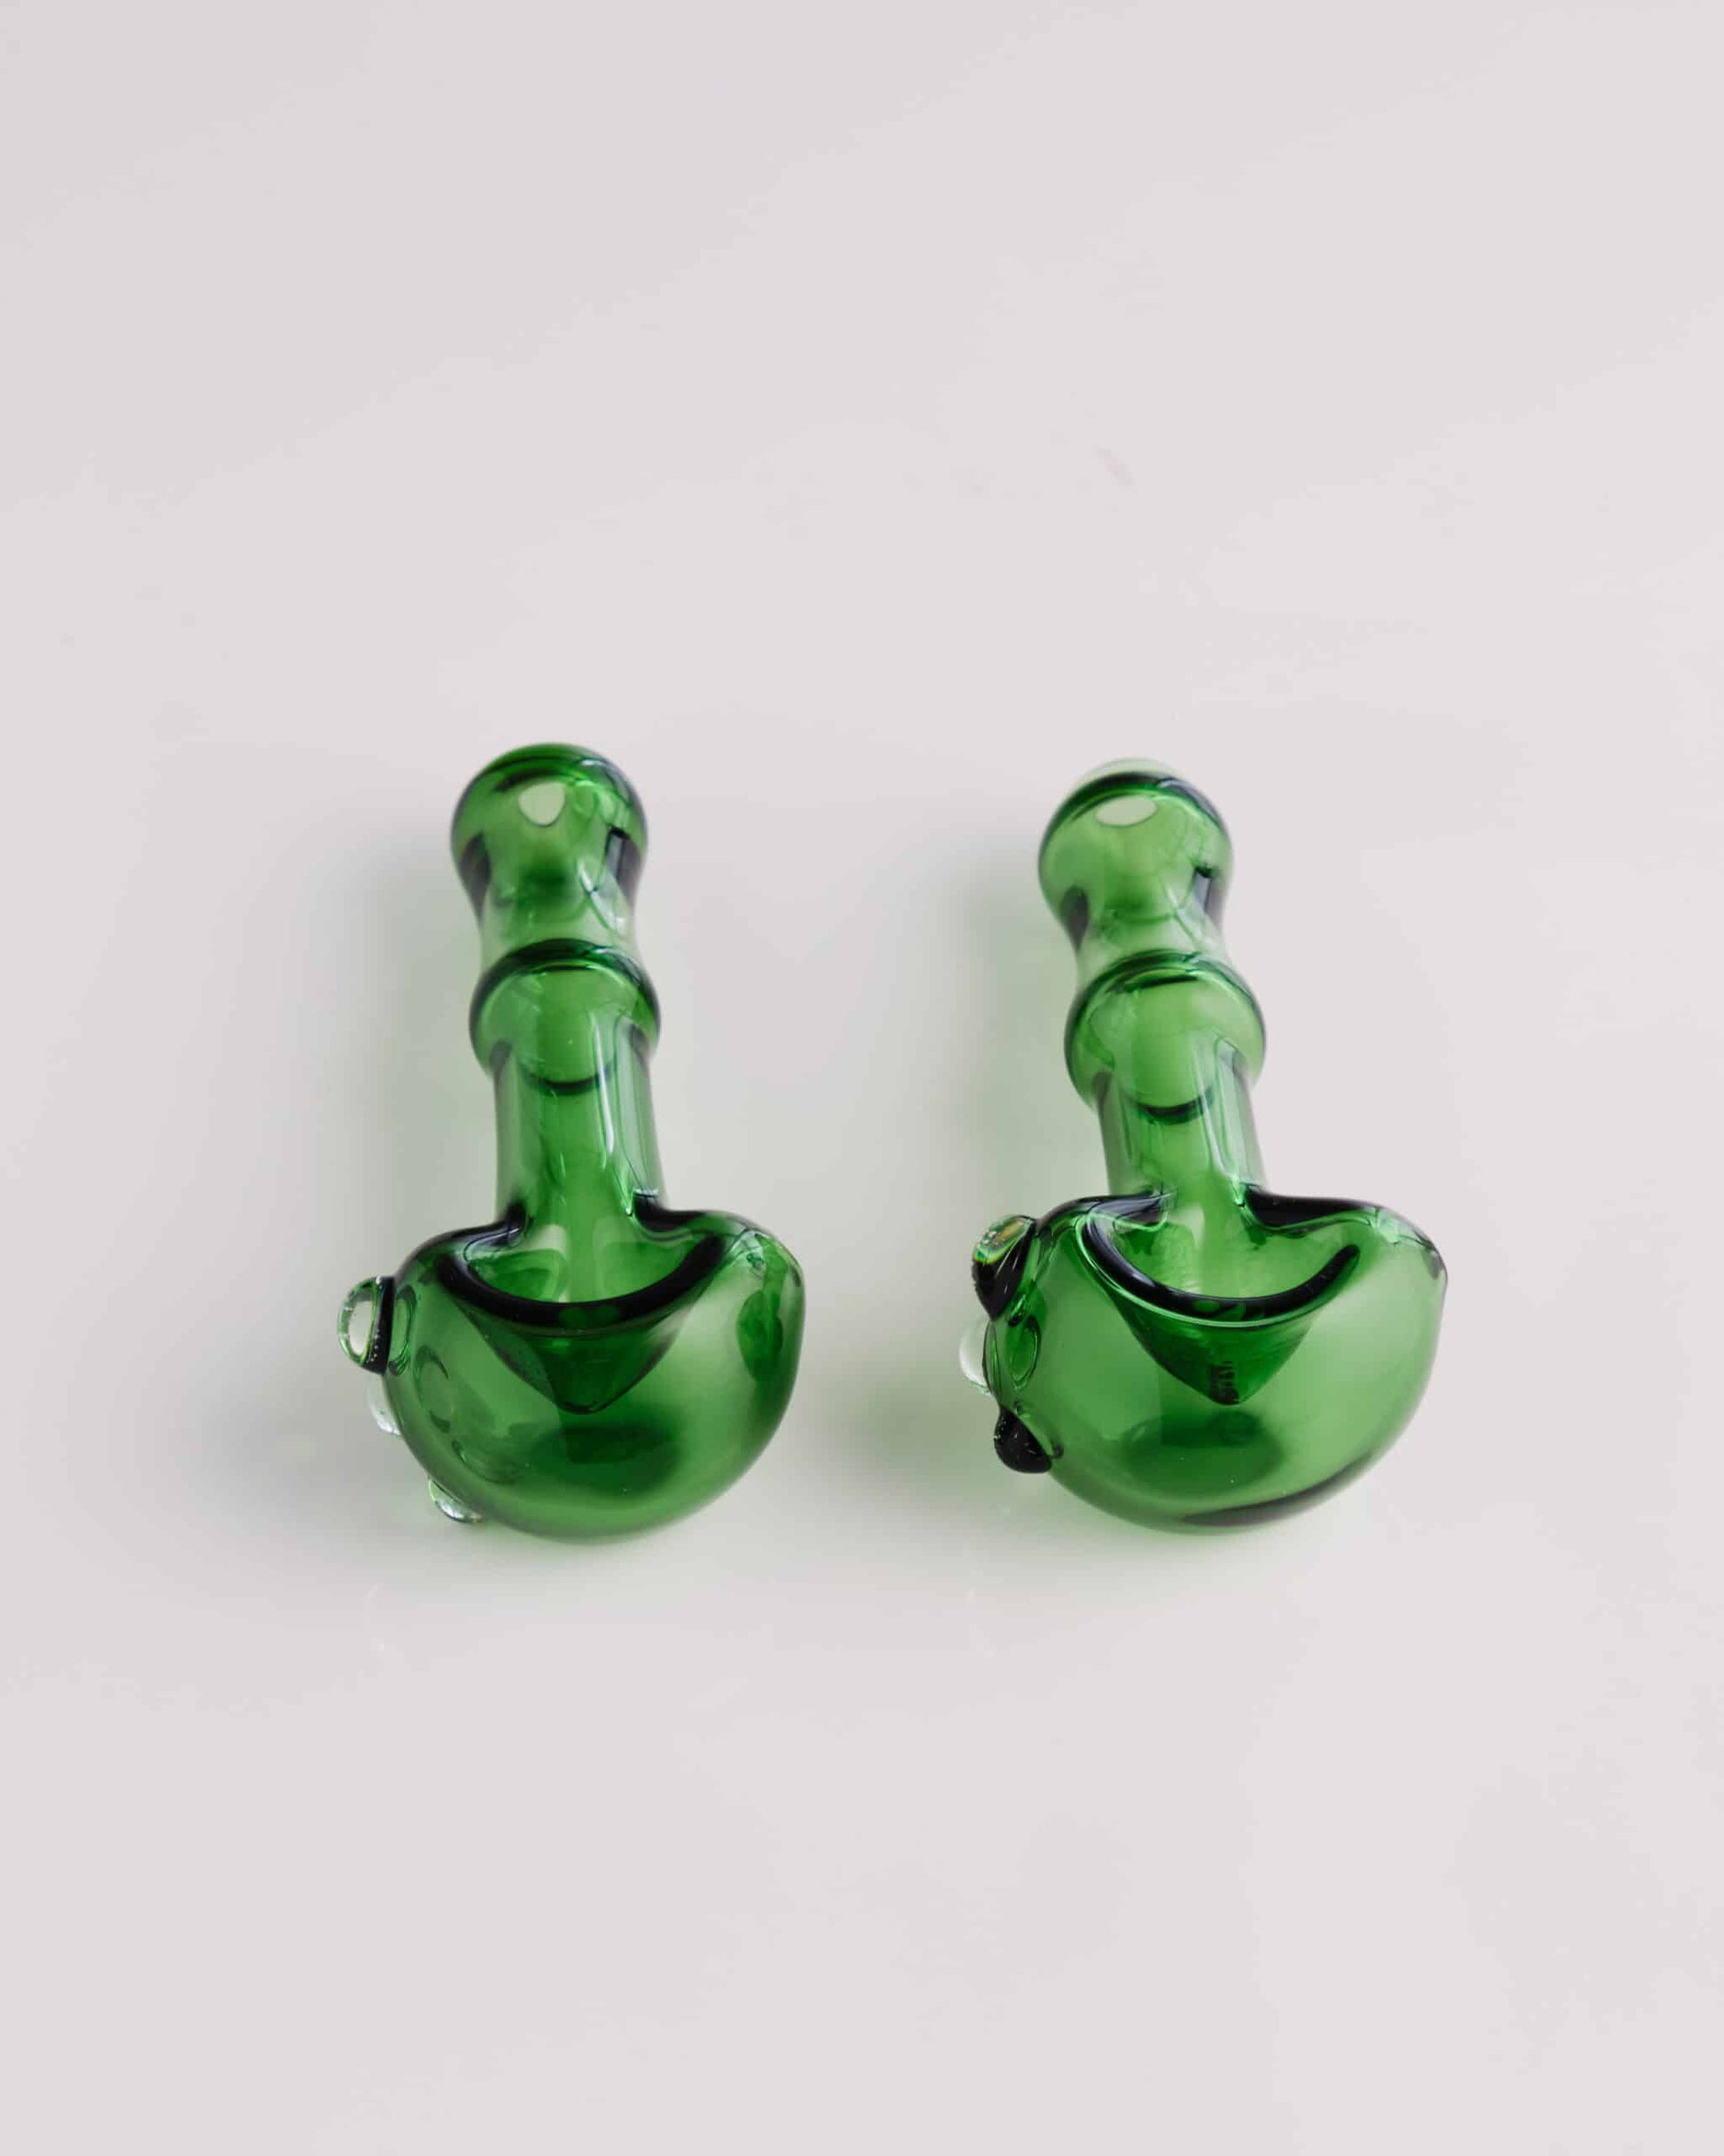 artisan-crafted design of the Green Spoon Pipe by Willy That Glass Guy